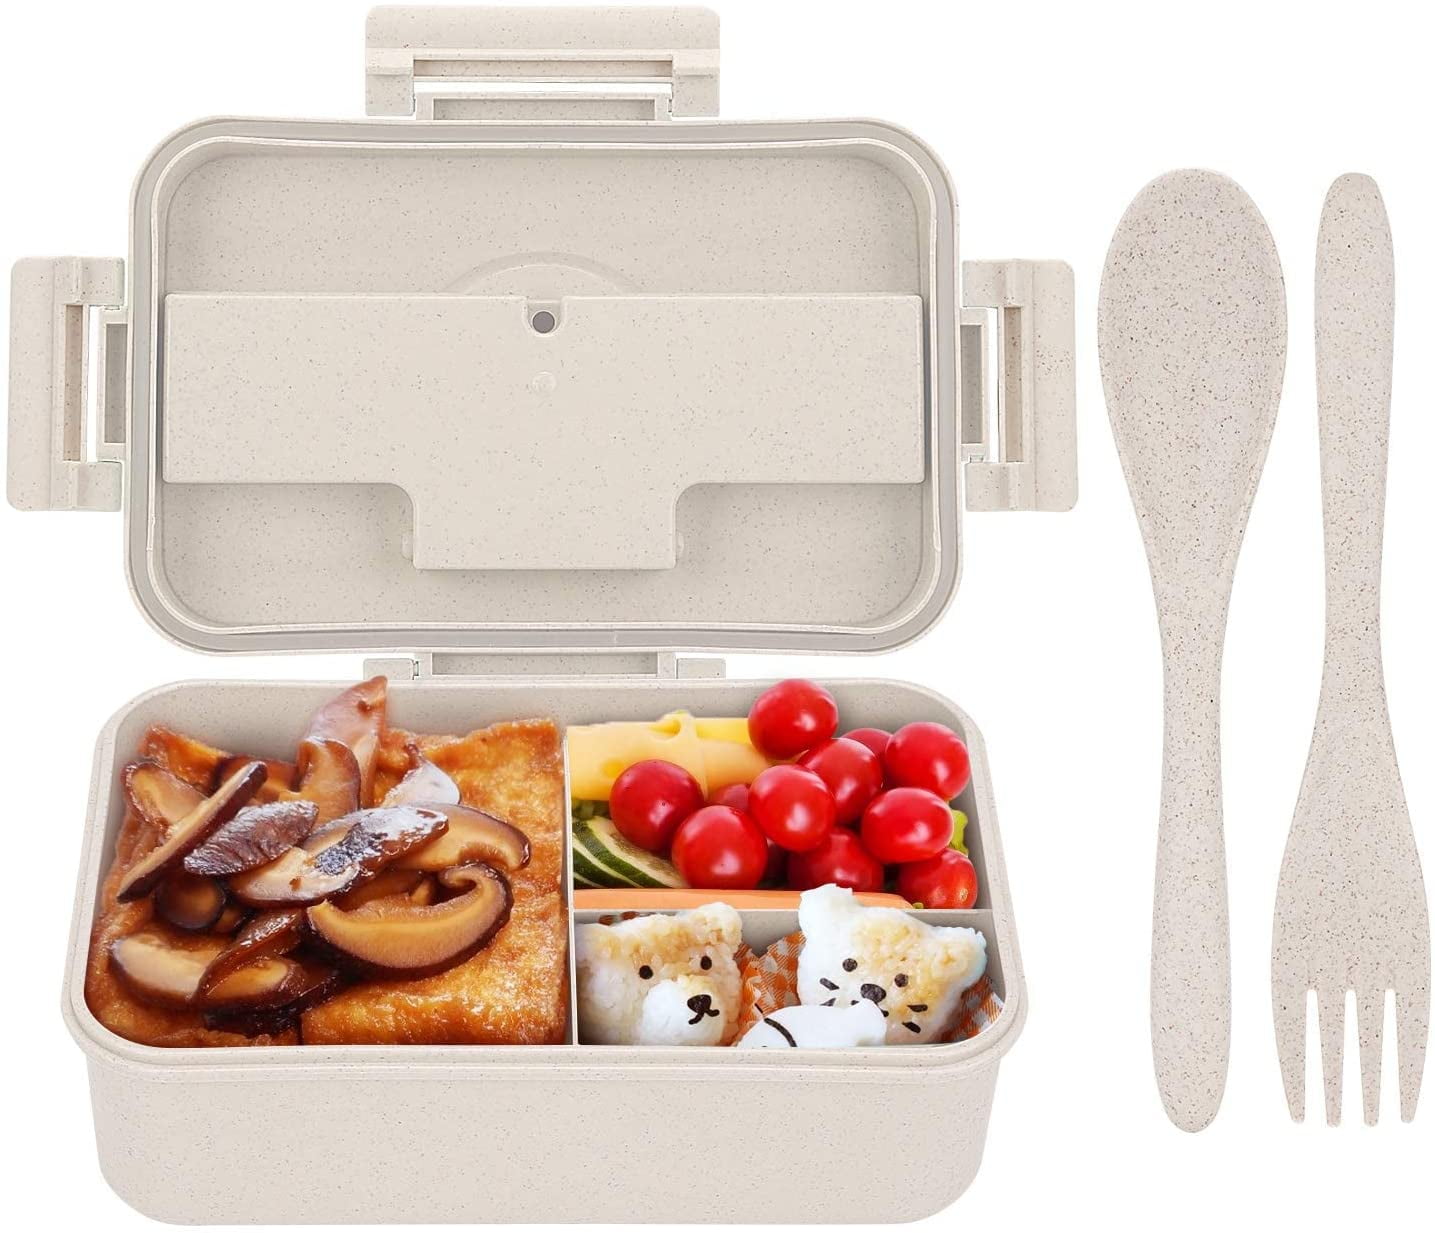 NatraProw Bento Box with Utensils, 1200 ML Lunch Containers for Adults,  LeakProof, BPA Free, 3 Compartment, Microwave Safe, Khaki